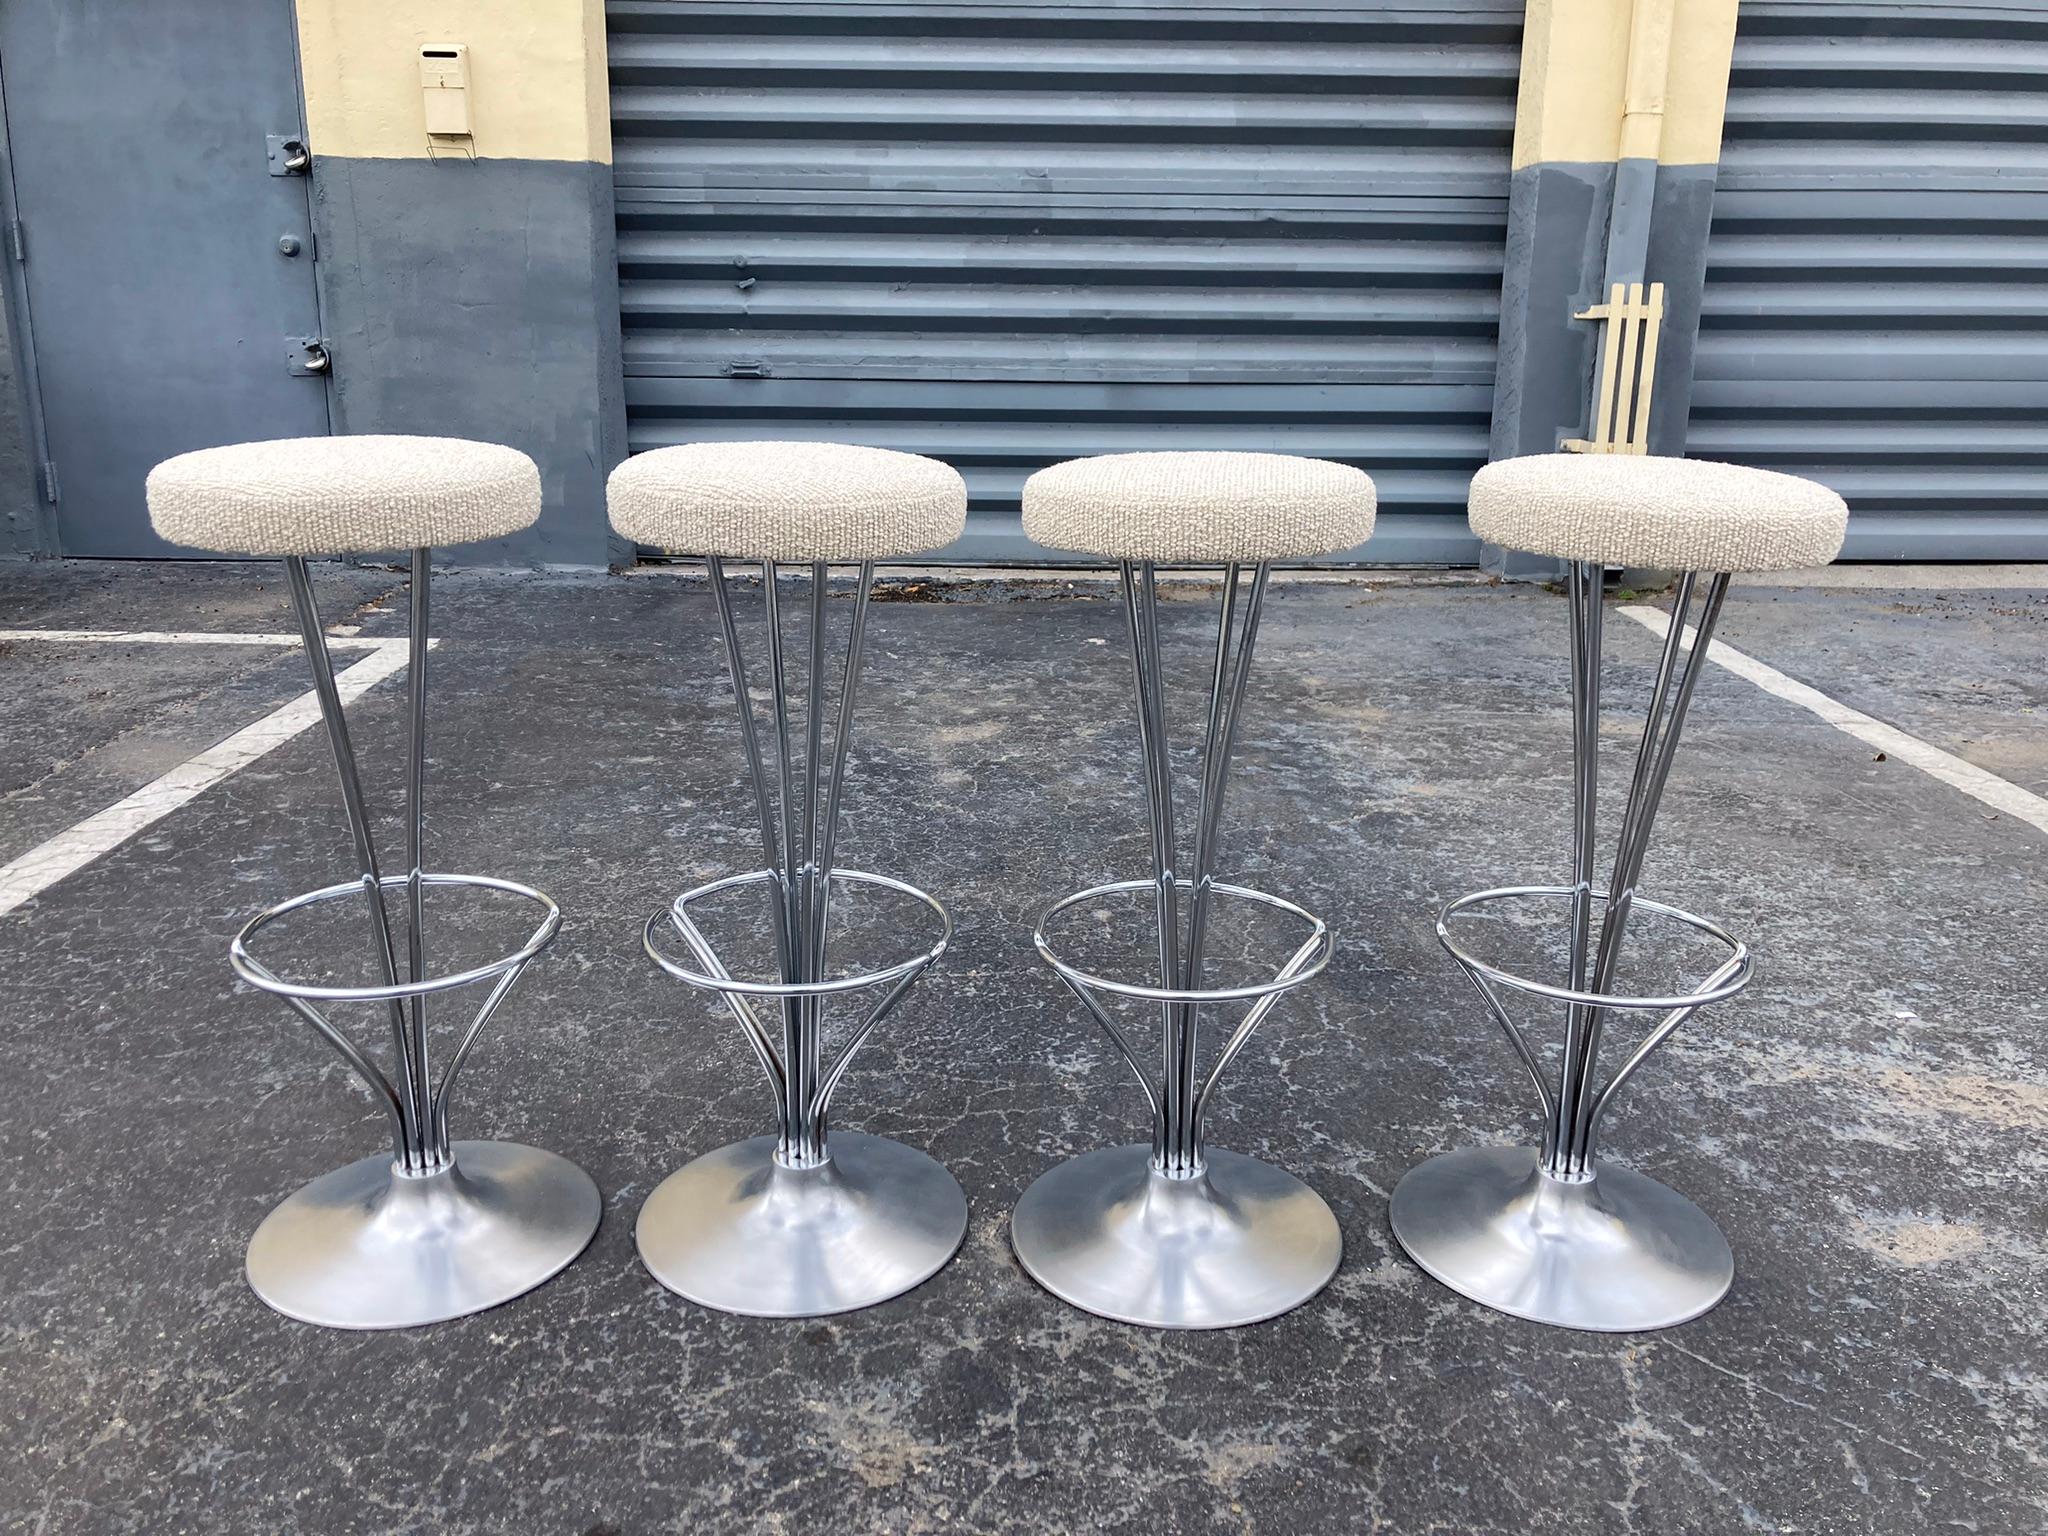 Set of 4 Piet Hein Bar Stools for Fritz Hansen from 1980. Seats were recovered in beautiful fabric. Ready for a new home.